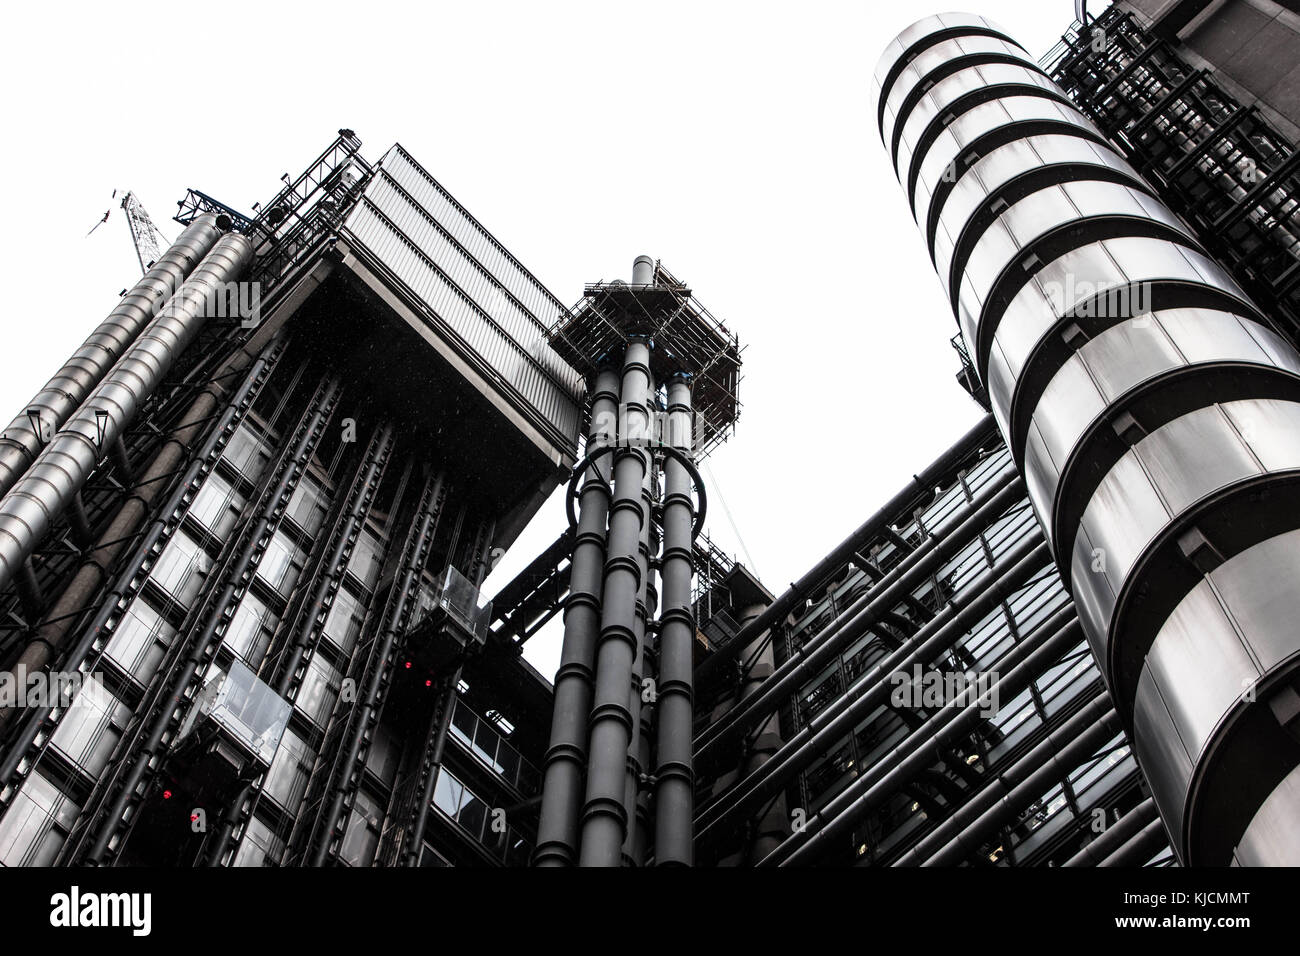 A view on Lloyd's Building inlondon. With a bright sky, we can see the complexity of this amazing High-Tech building. Stock Photo